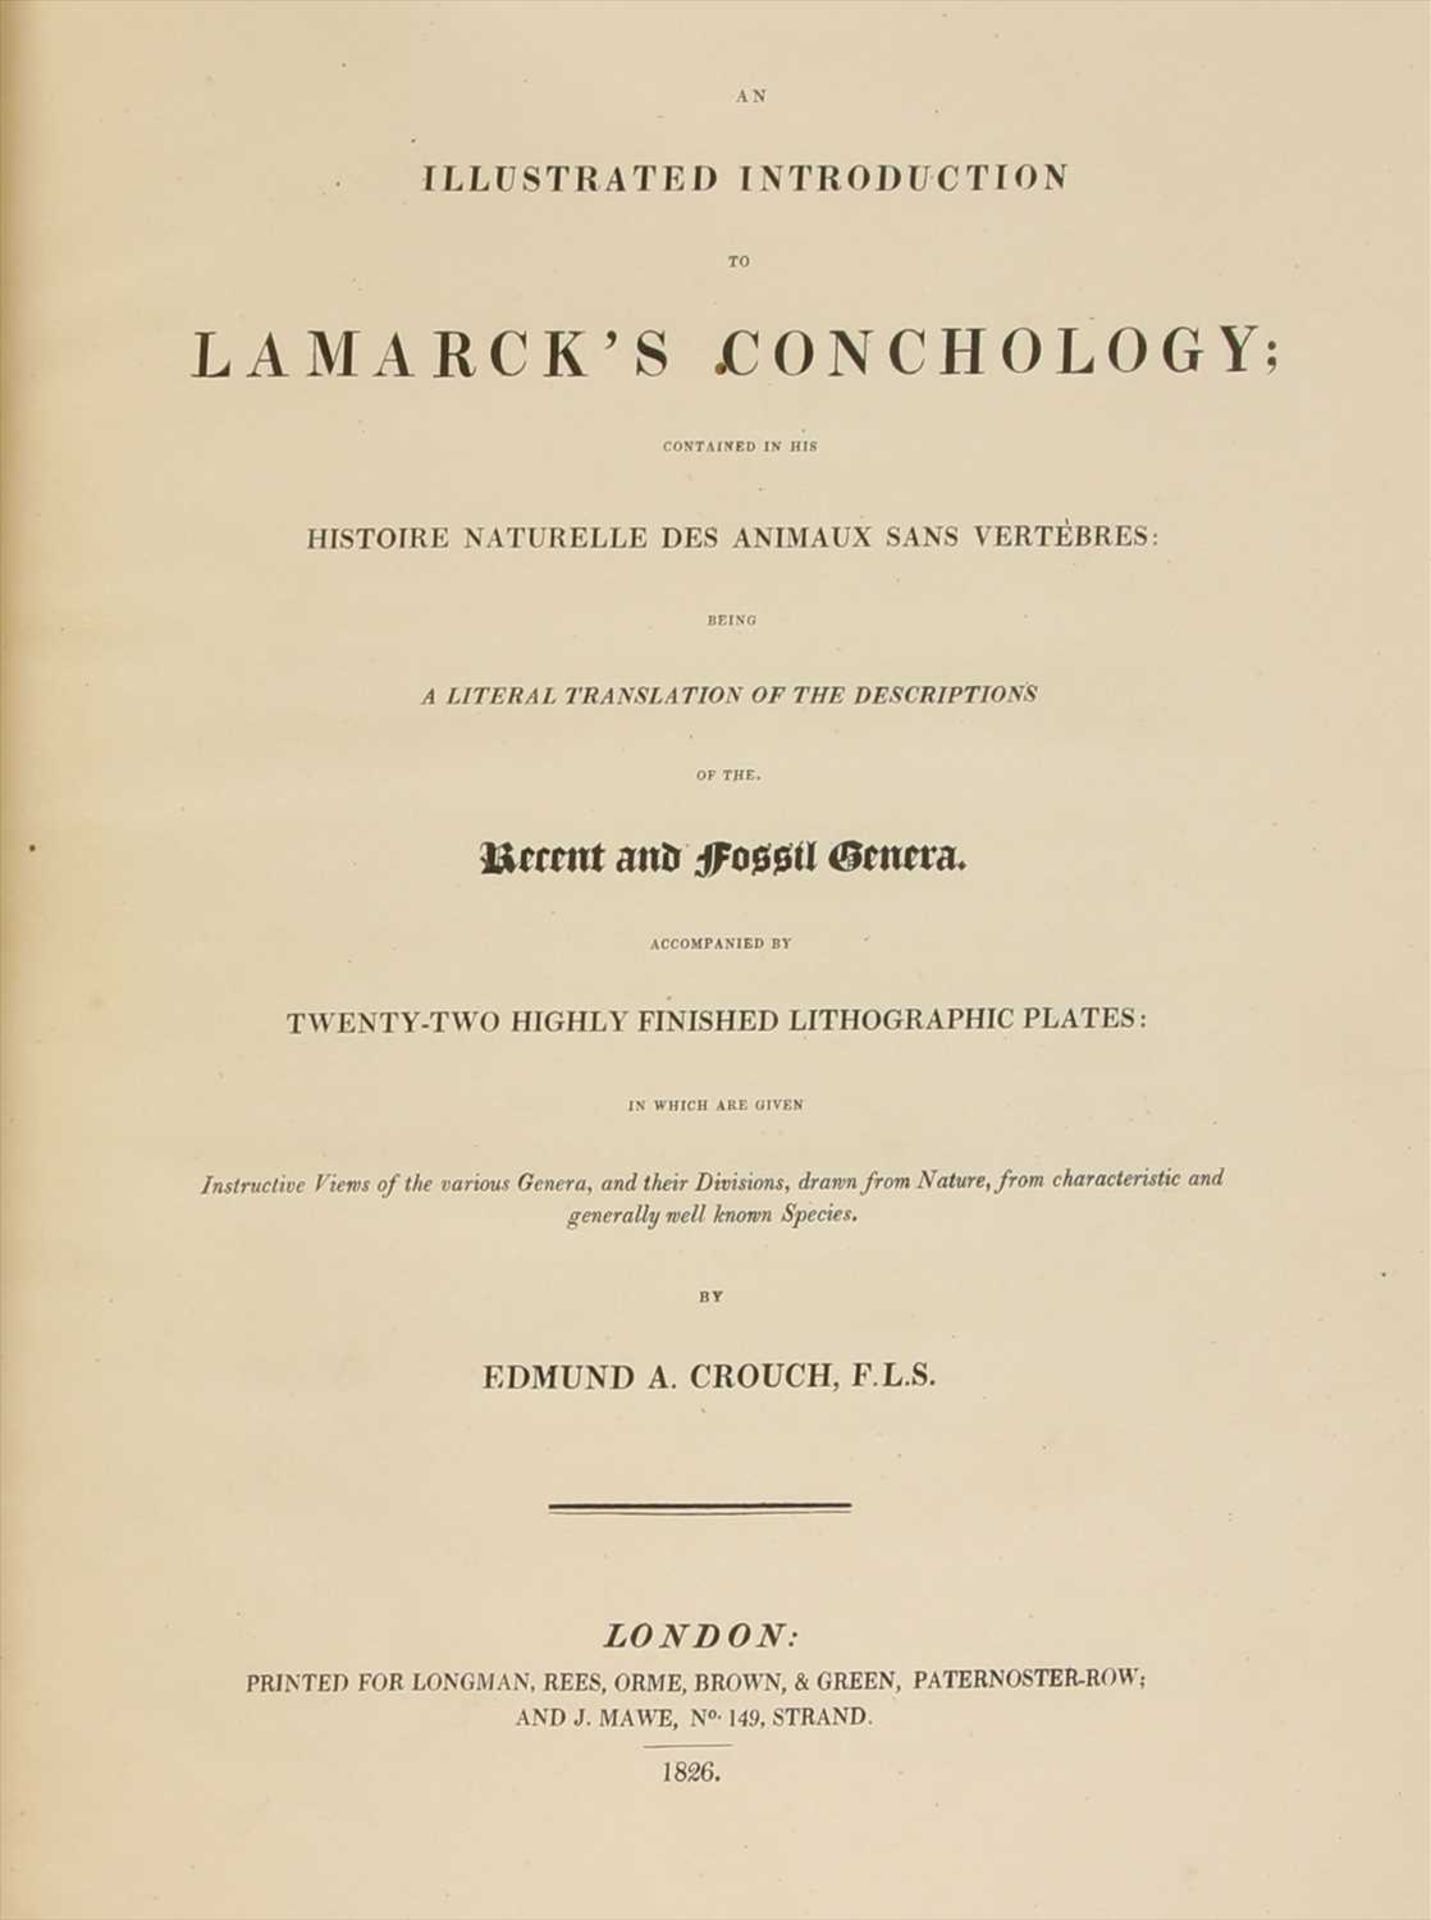 CONCHOLOGY: 1- Crouch, E A: An Illustrated Introduction to Lamarck's Conchology.. - Image 2 of 4